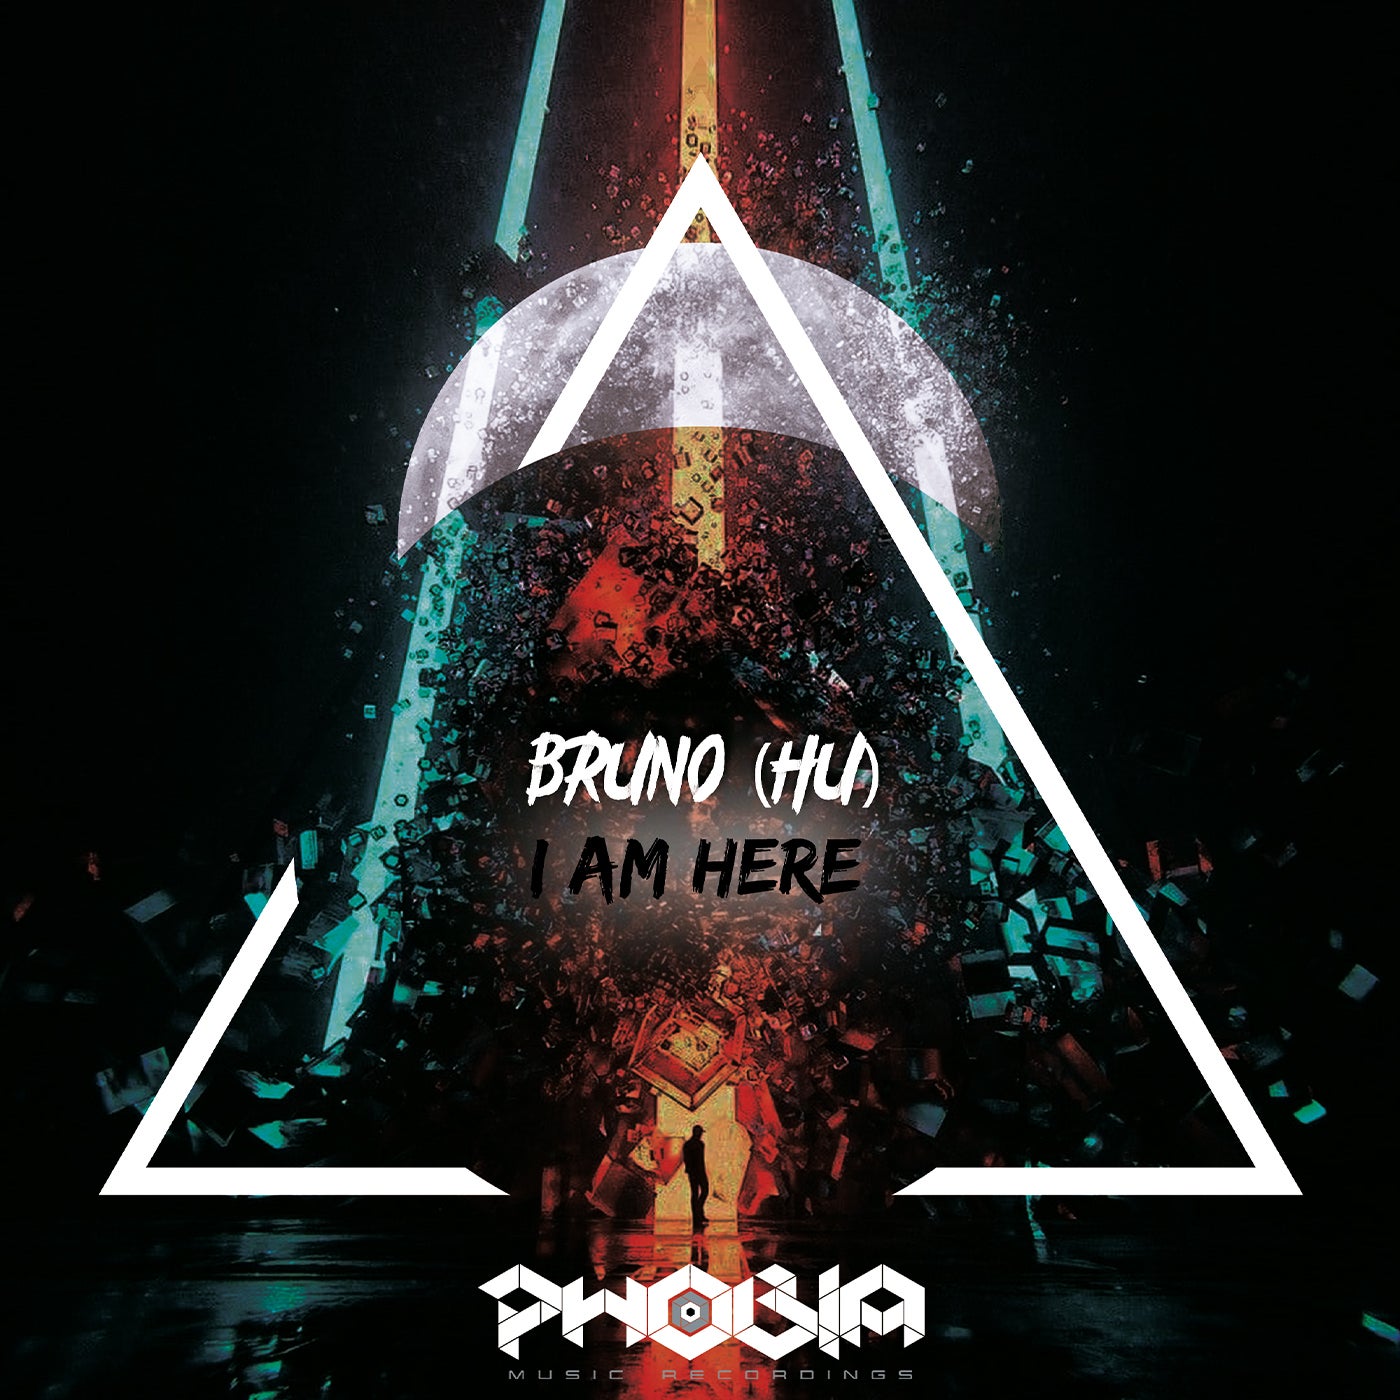 image cover: Bruno (HU) - I Am Here on PHOBIA Music Recordings